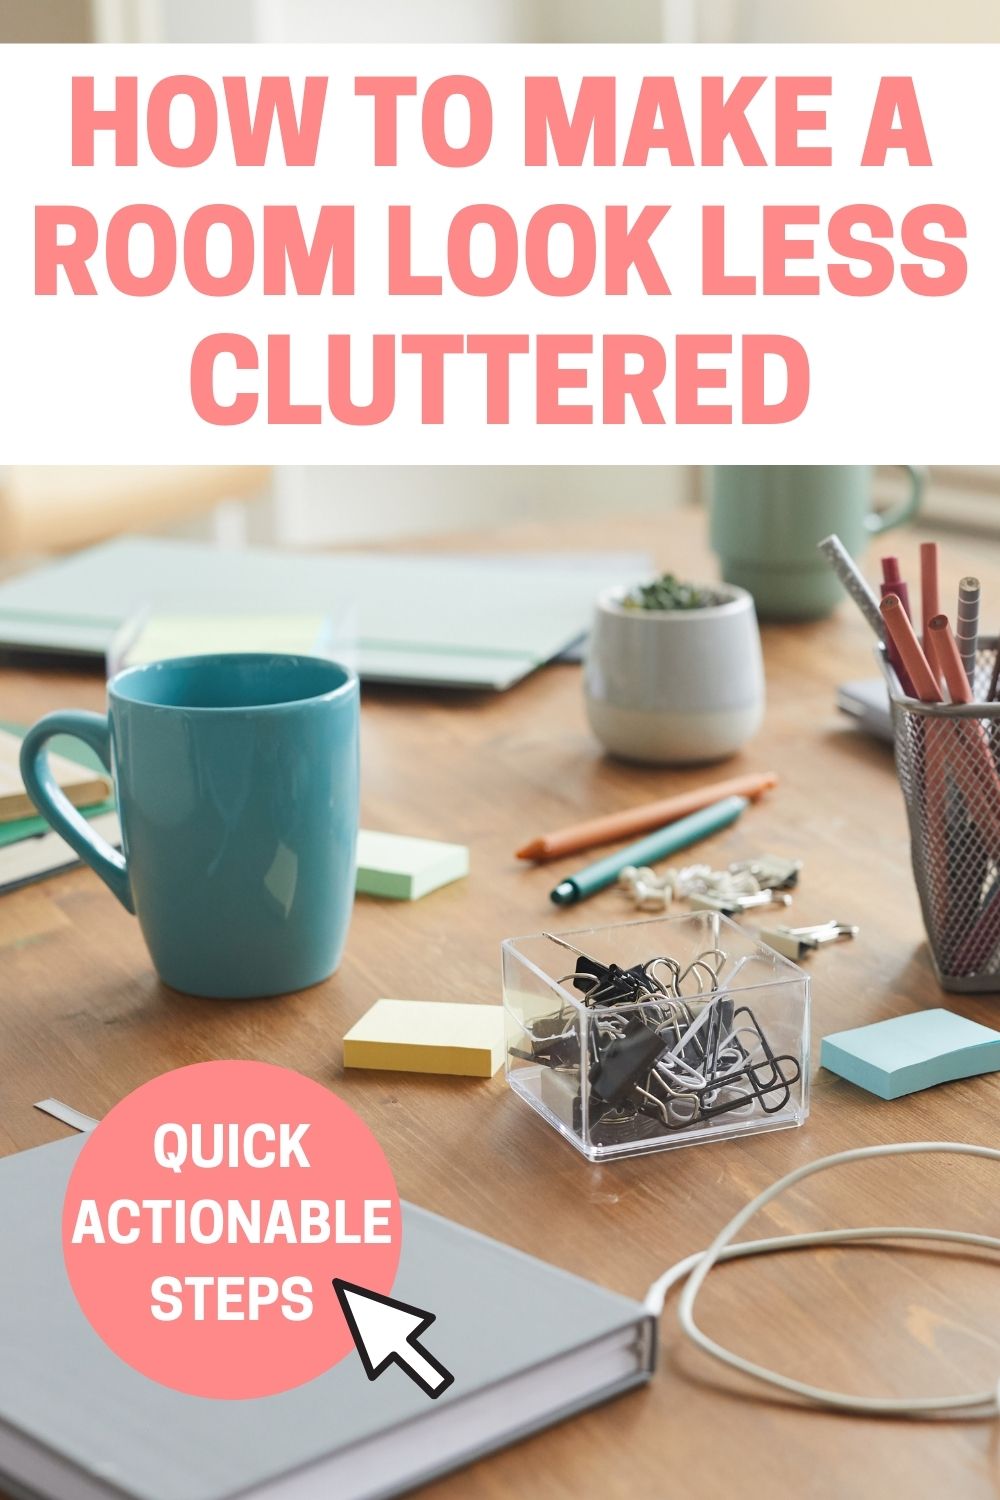 text: how to make a room look less cluttered quick actionable steps image of desk with mugs, papers, cords, clutter